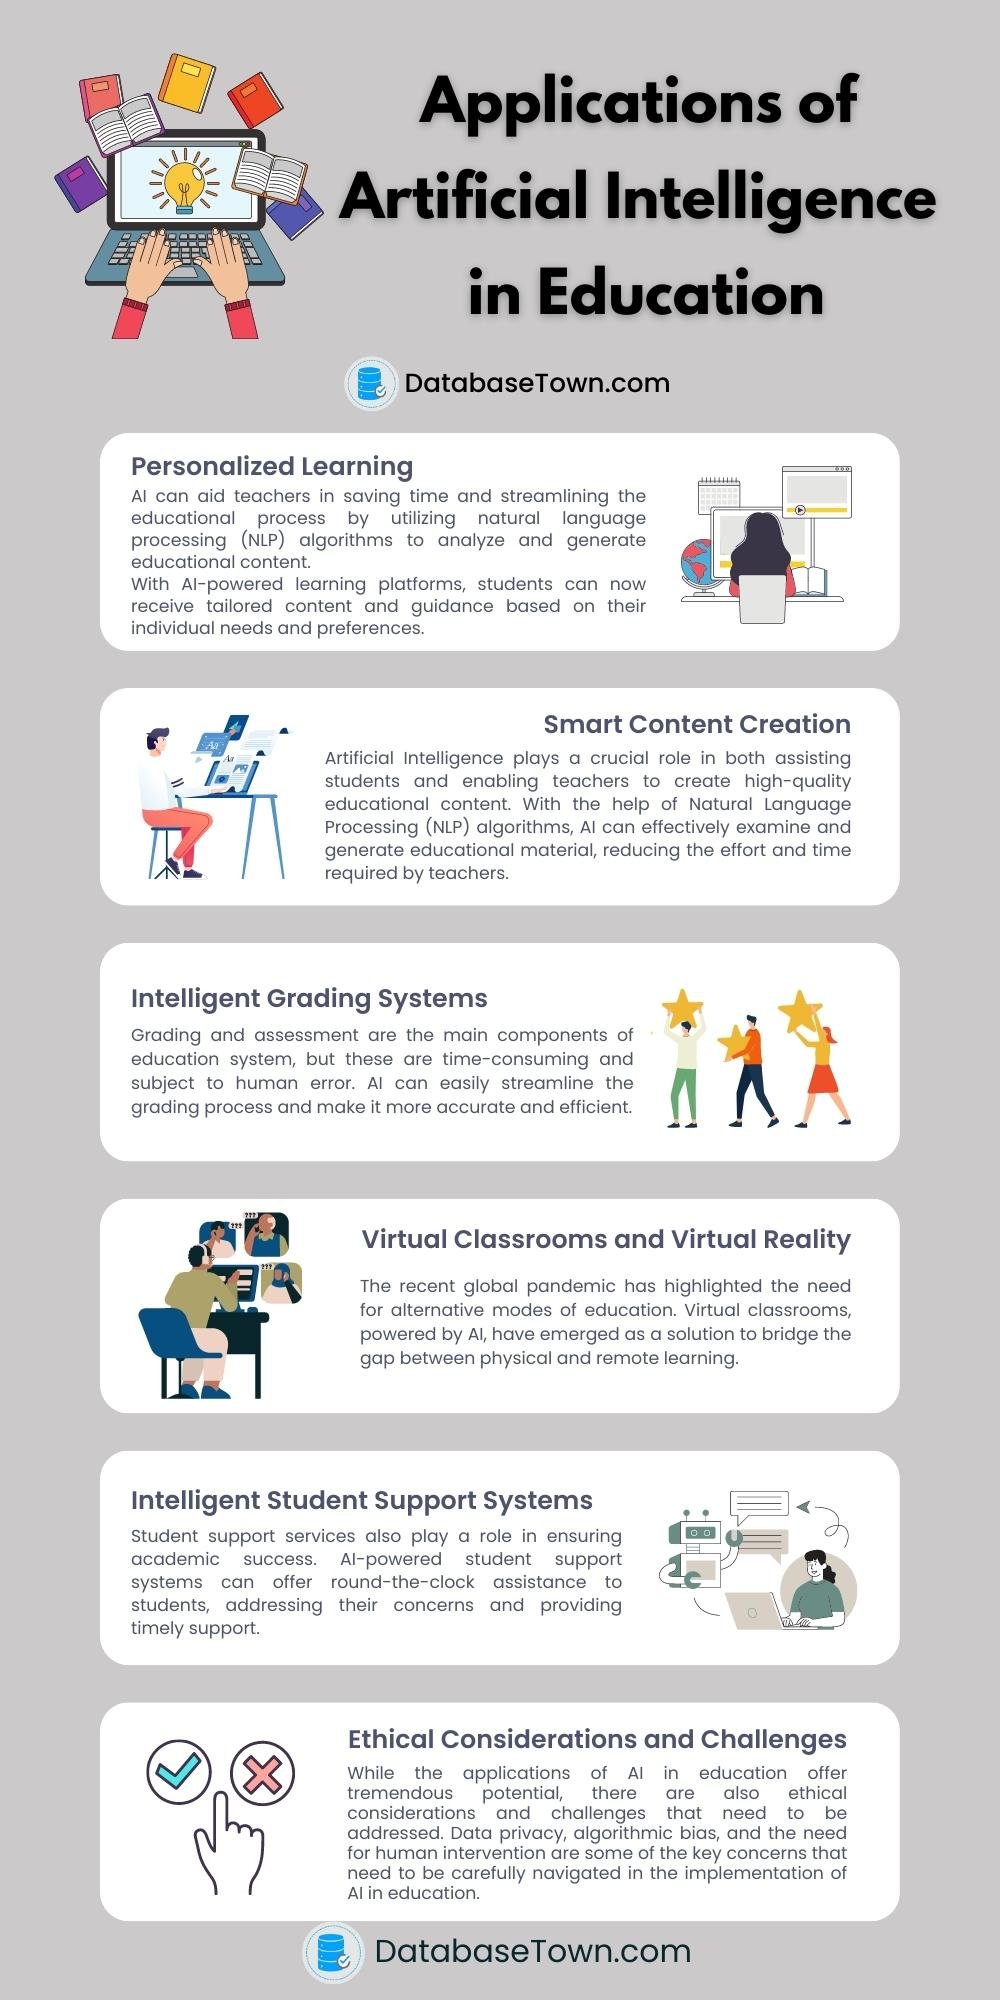 Applications of Artificial Intelligence in Education